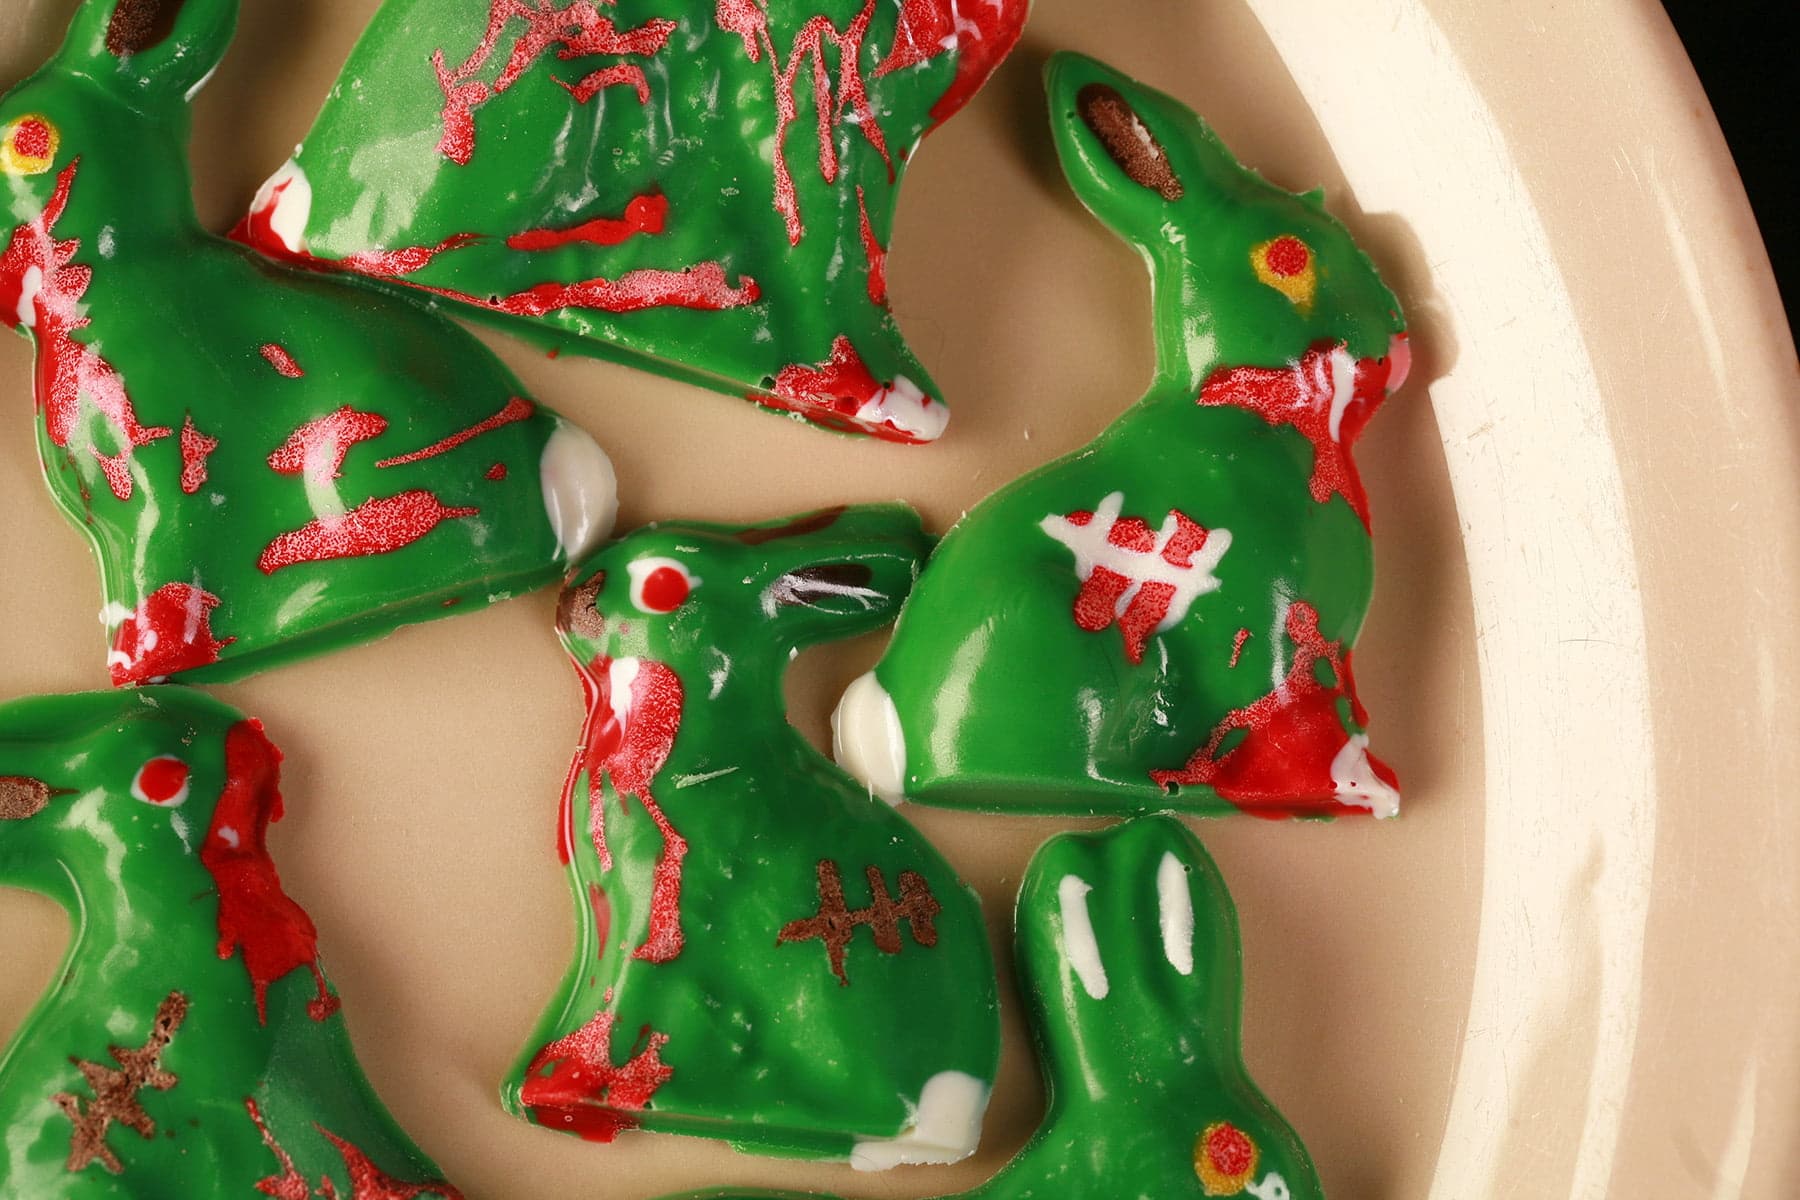 6 different Chocolate Zombie Easter Bunnies are arranged on a beige coloured oval plate. They're all green with red, white, and brown designs to make them look blood spattered, scarred, etc.